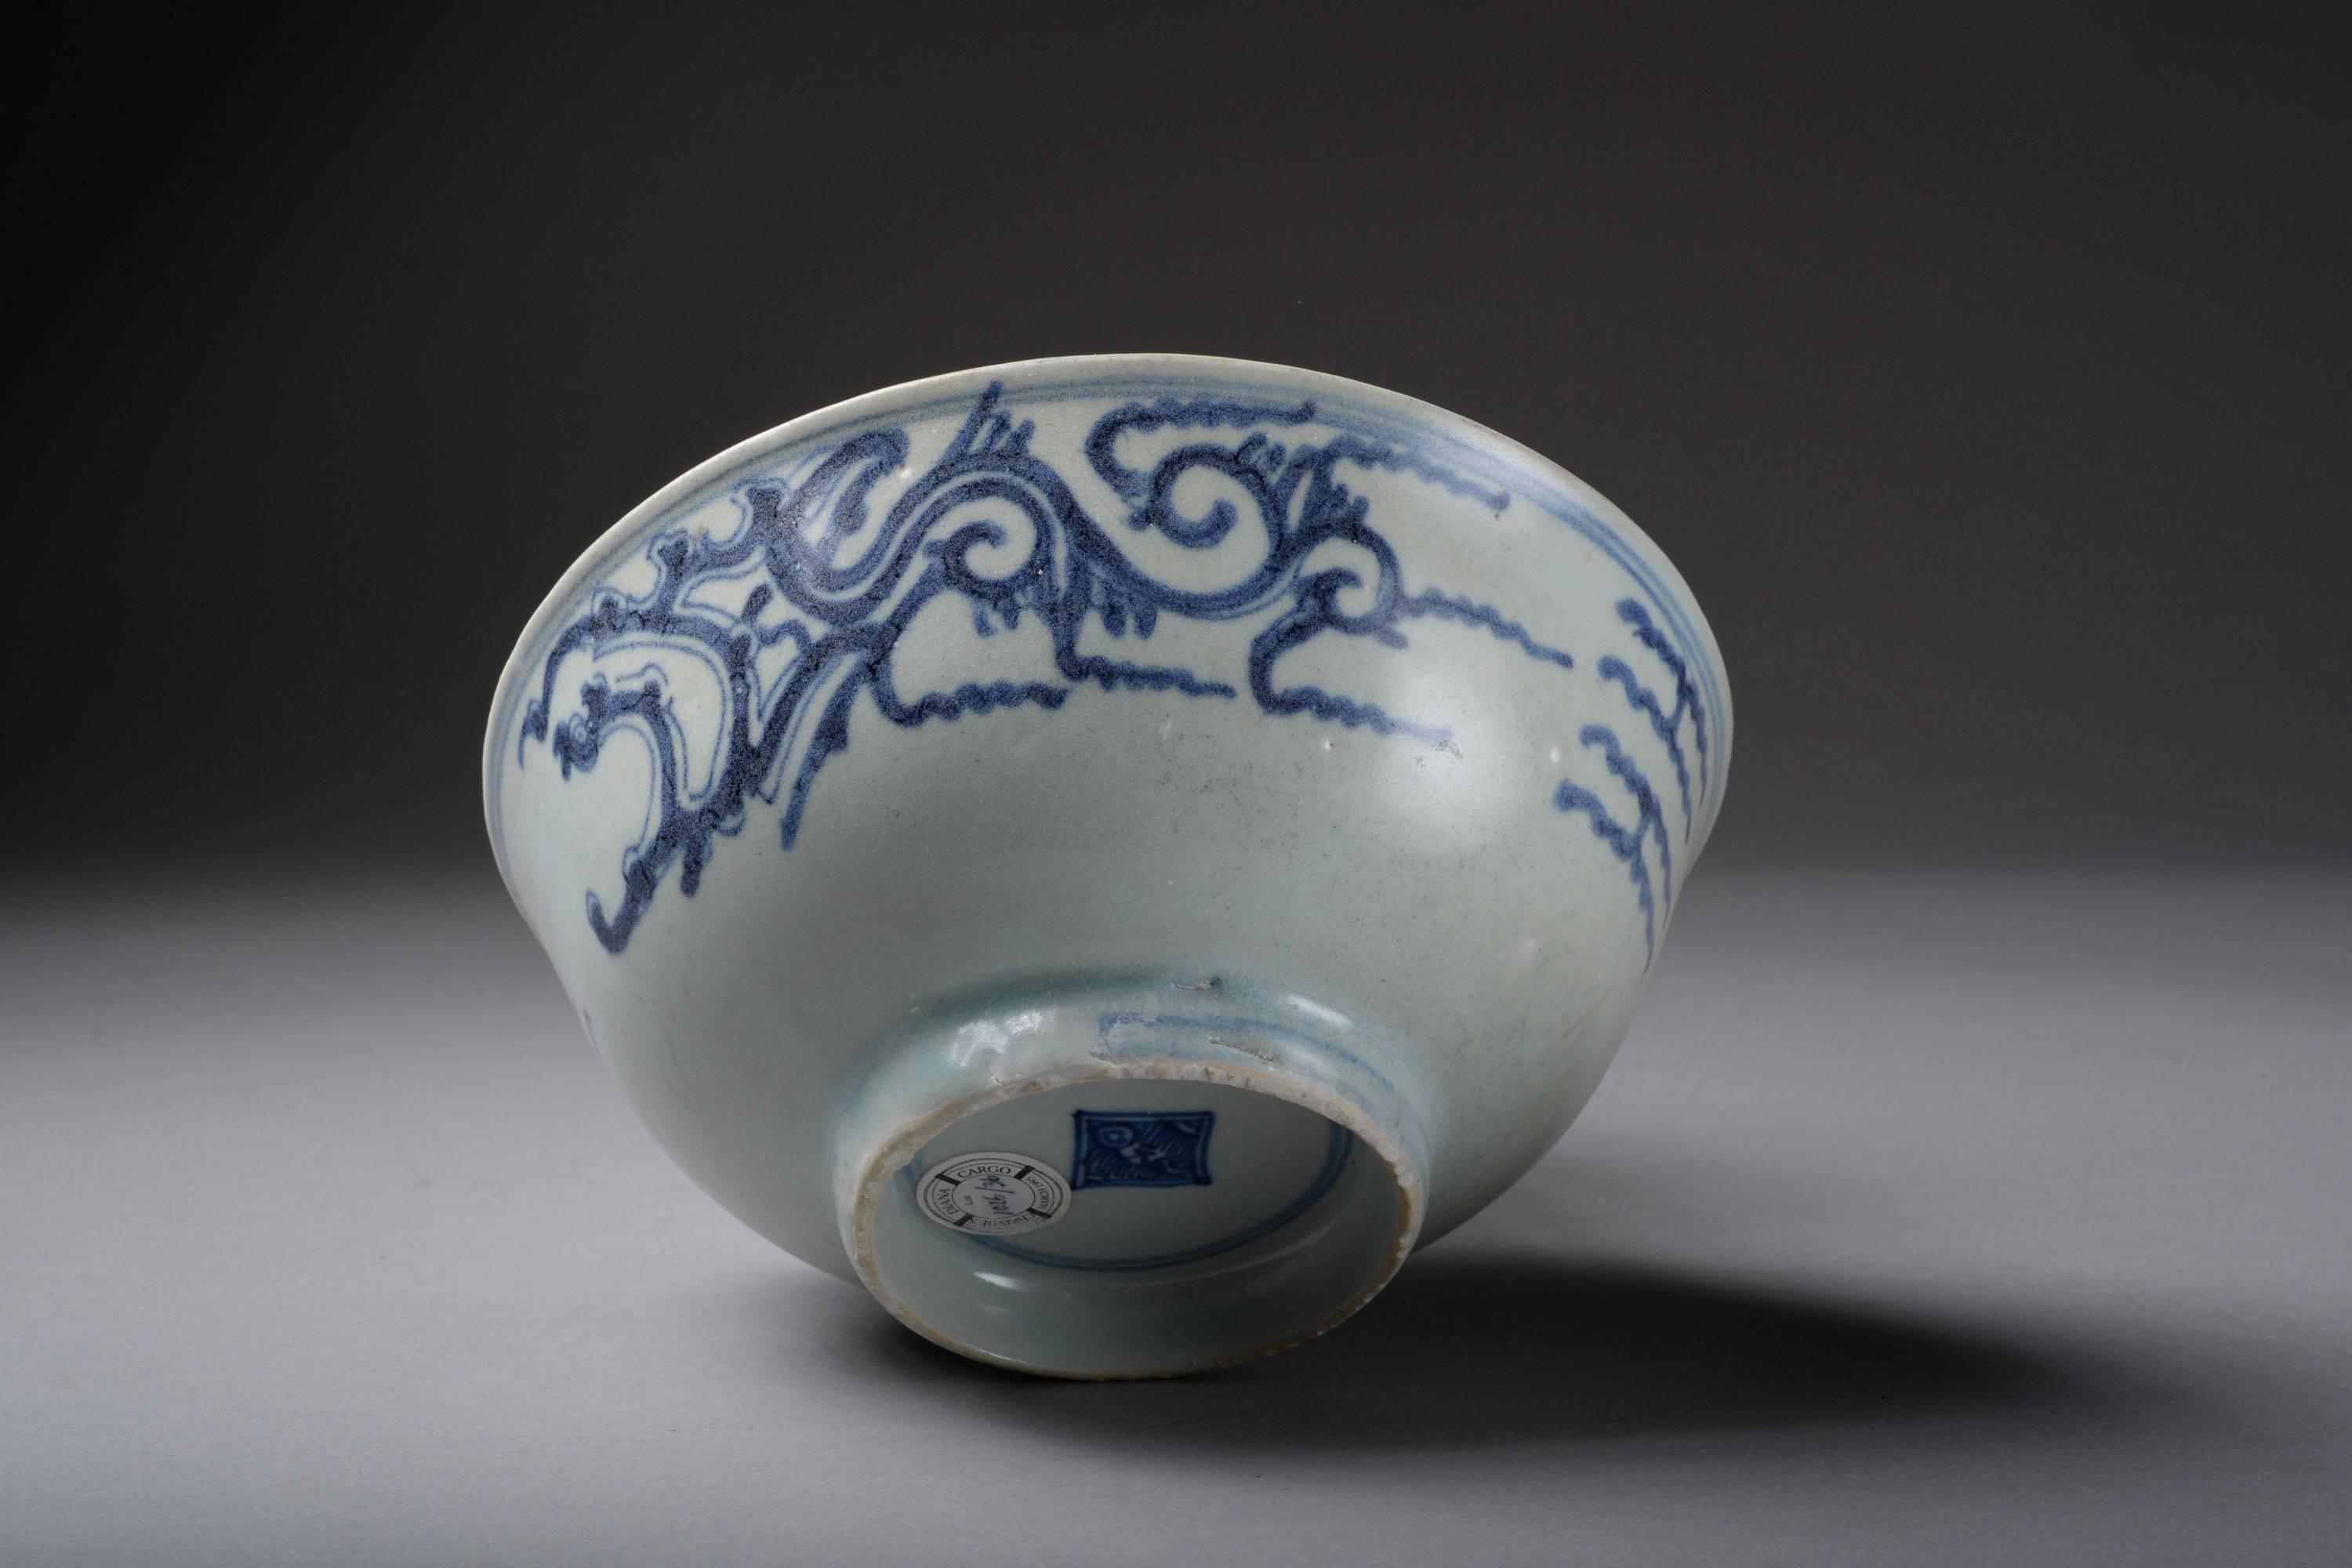 A superb, large and extremely decorative antique Chinese blue and white porcelain bowl. Salvaged from the Diana cargo shipwreck and dating to 1817. Sold at Christie's, March 1995.

Profusely decorated in vibrant blue on a white ground with